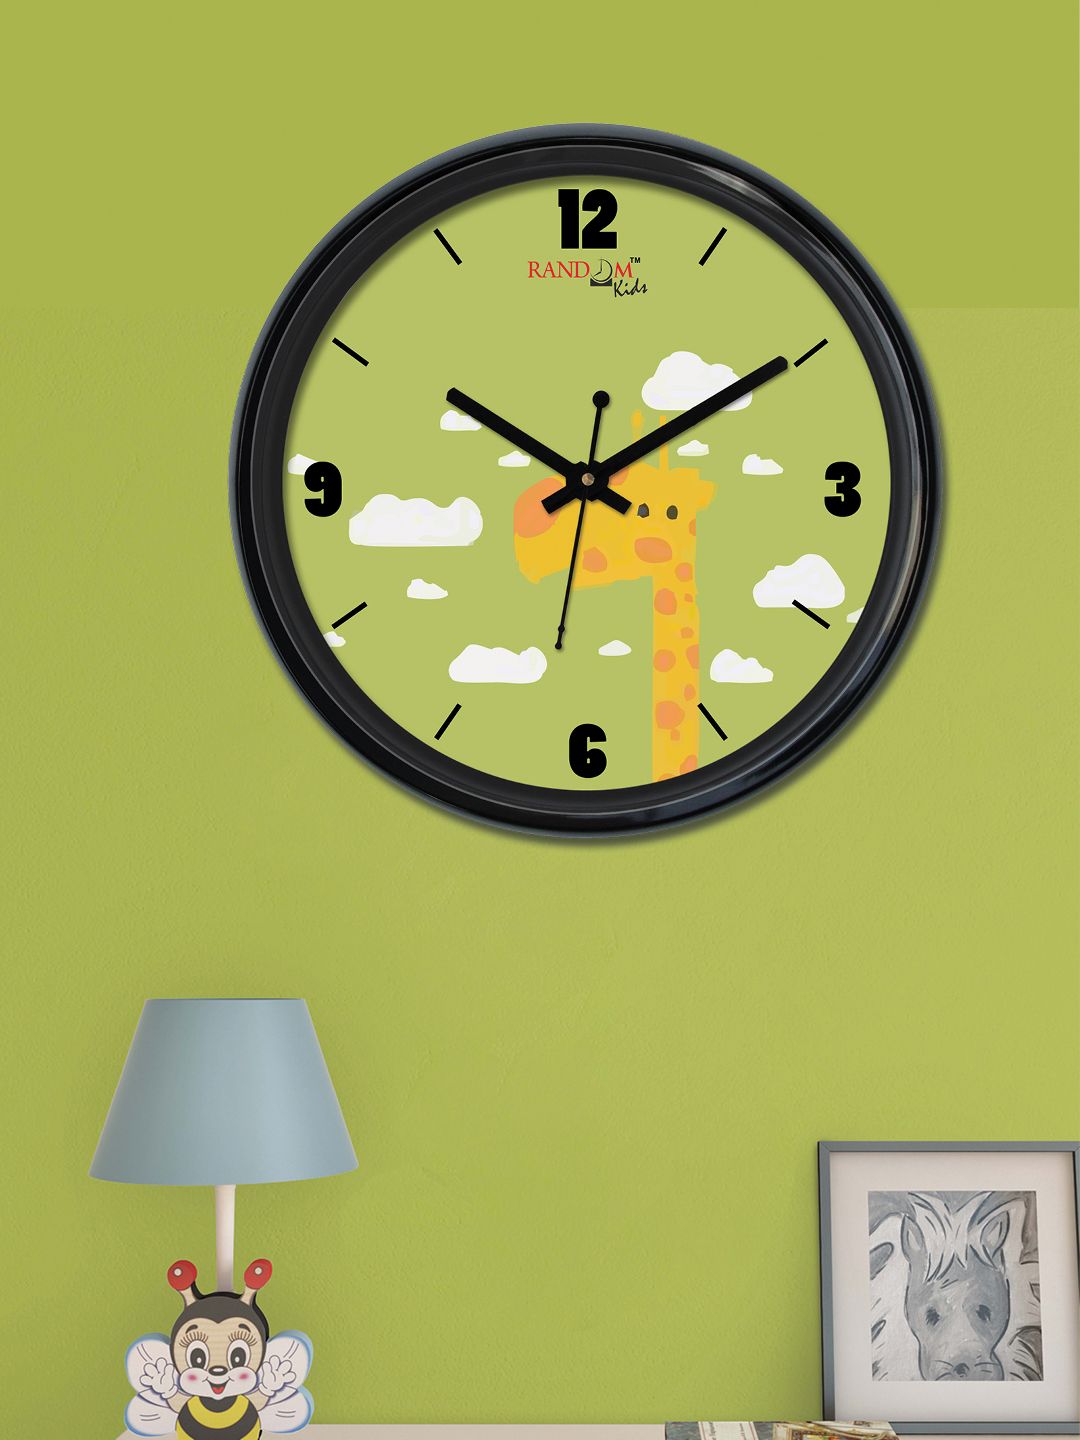 RANDOM Lime Green Round Printed Analogue Wall Clock Price in India